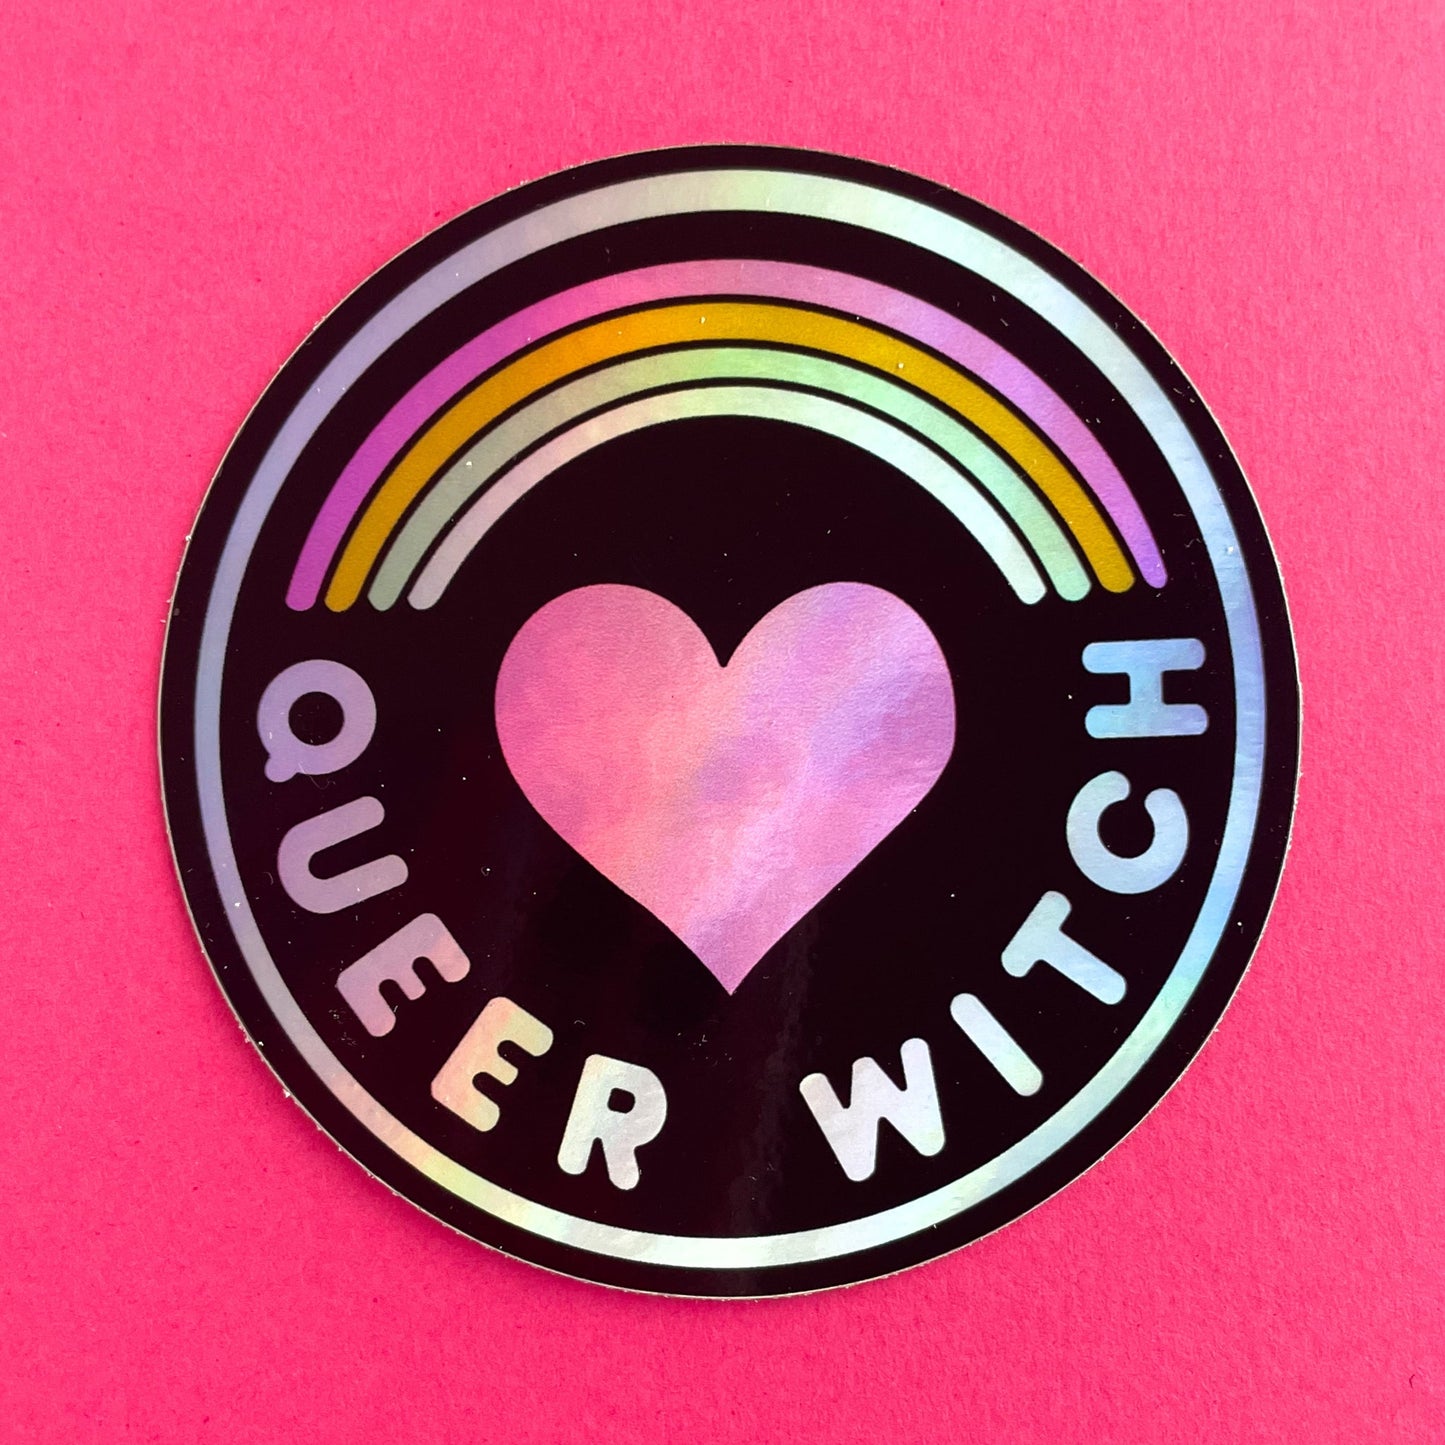 A circular holographic sticker with a black background and the words "Queer Witch" on it. It has a heart with a rainbow above it. The sticker is on a hot pink background.